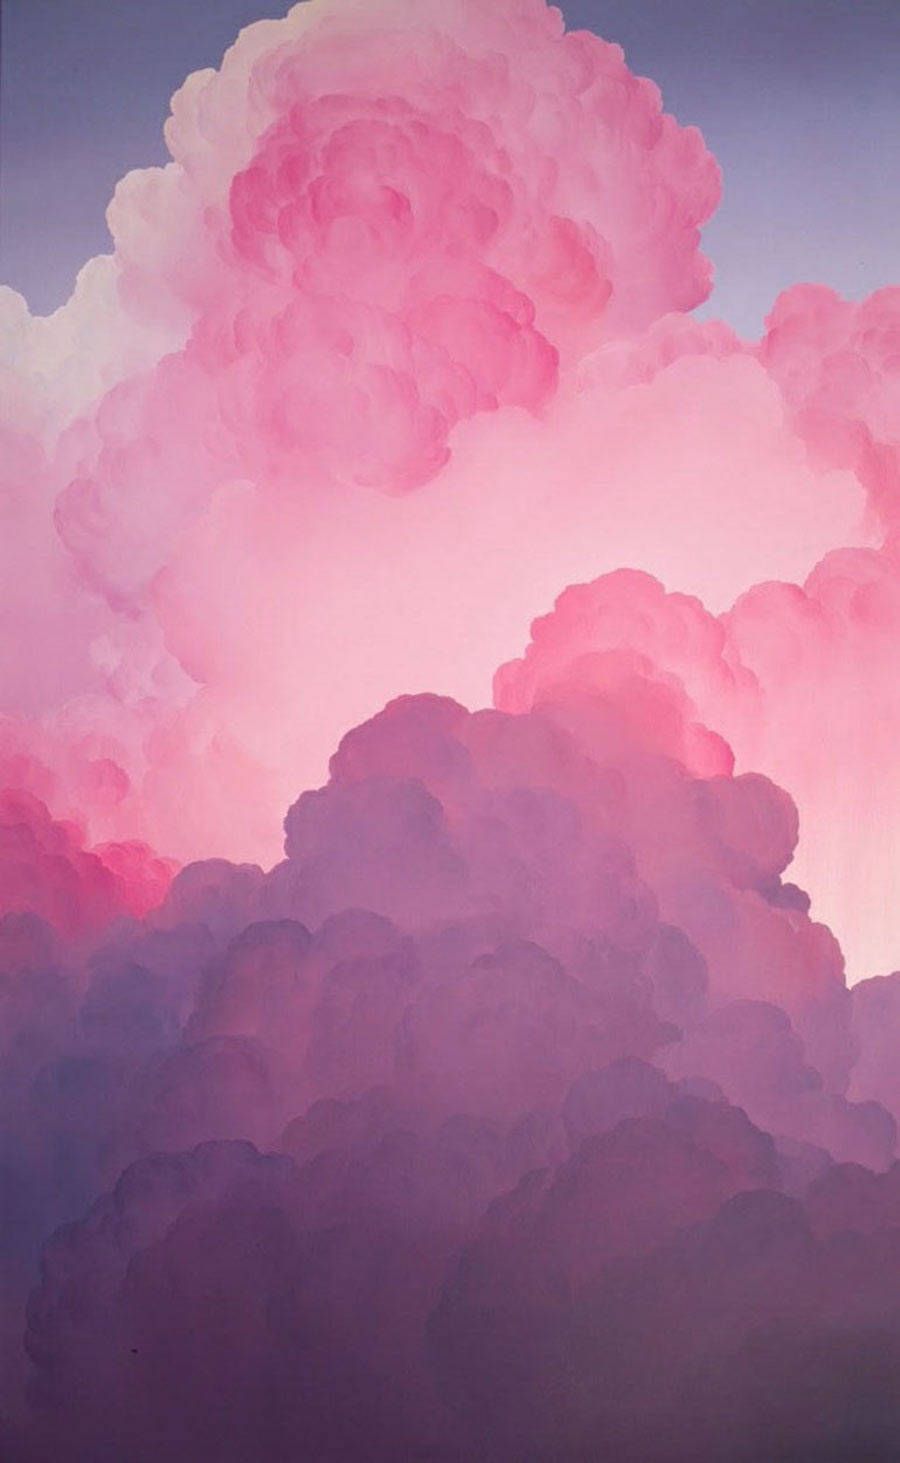 Pink Clouds Wallpapers On Wallpaperdog Pink clouds ultrahd wallpaper for wide 16:10 5:3 widescreen whxga wqxga wuxga wxga wga ; pink clouds wallpapers on wallpaperdog